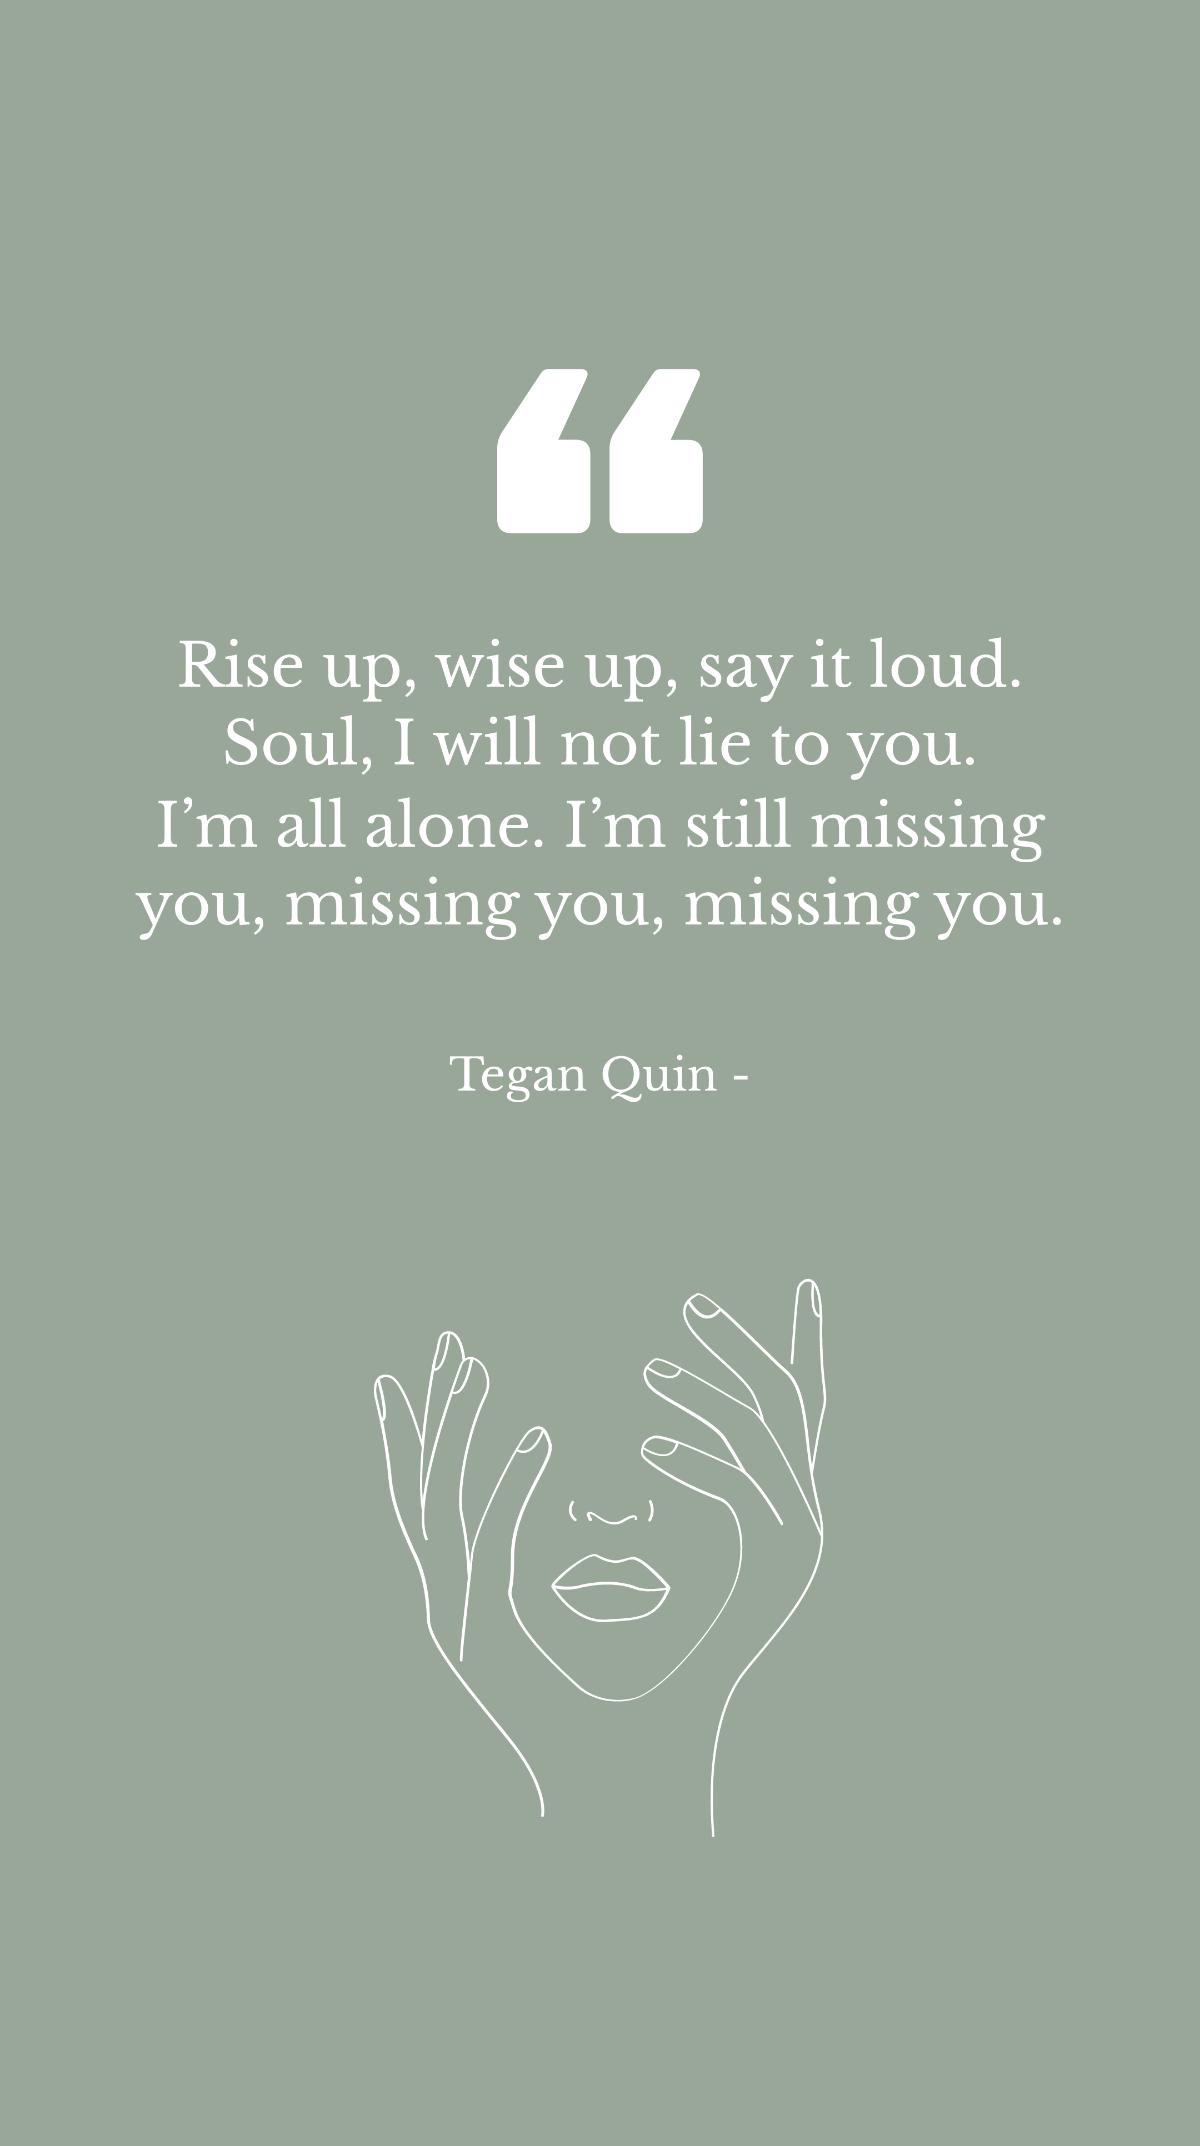 Tegan Quin - Rise up, wise up, say it loud. Soul, I will not lie to you. I’m all alone. I’m still missing you, missing you, missing you.